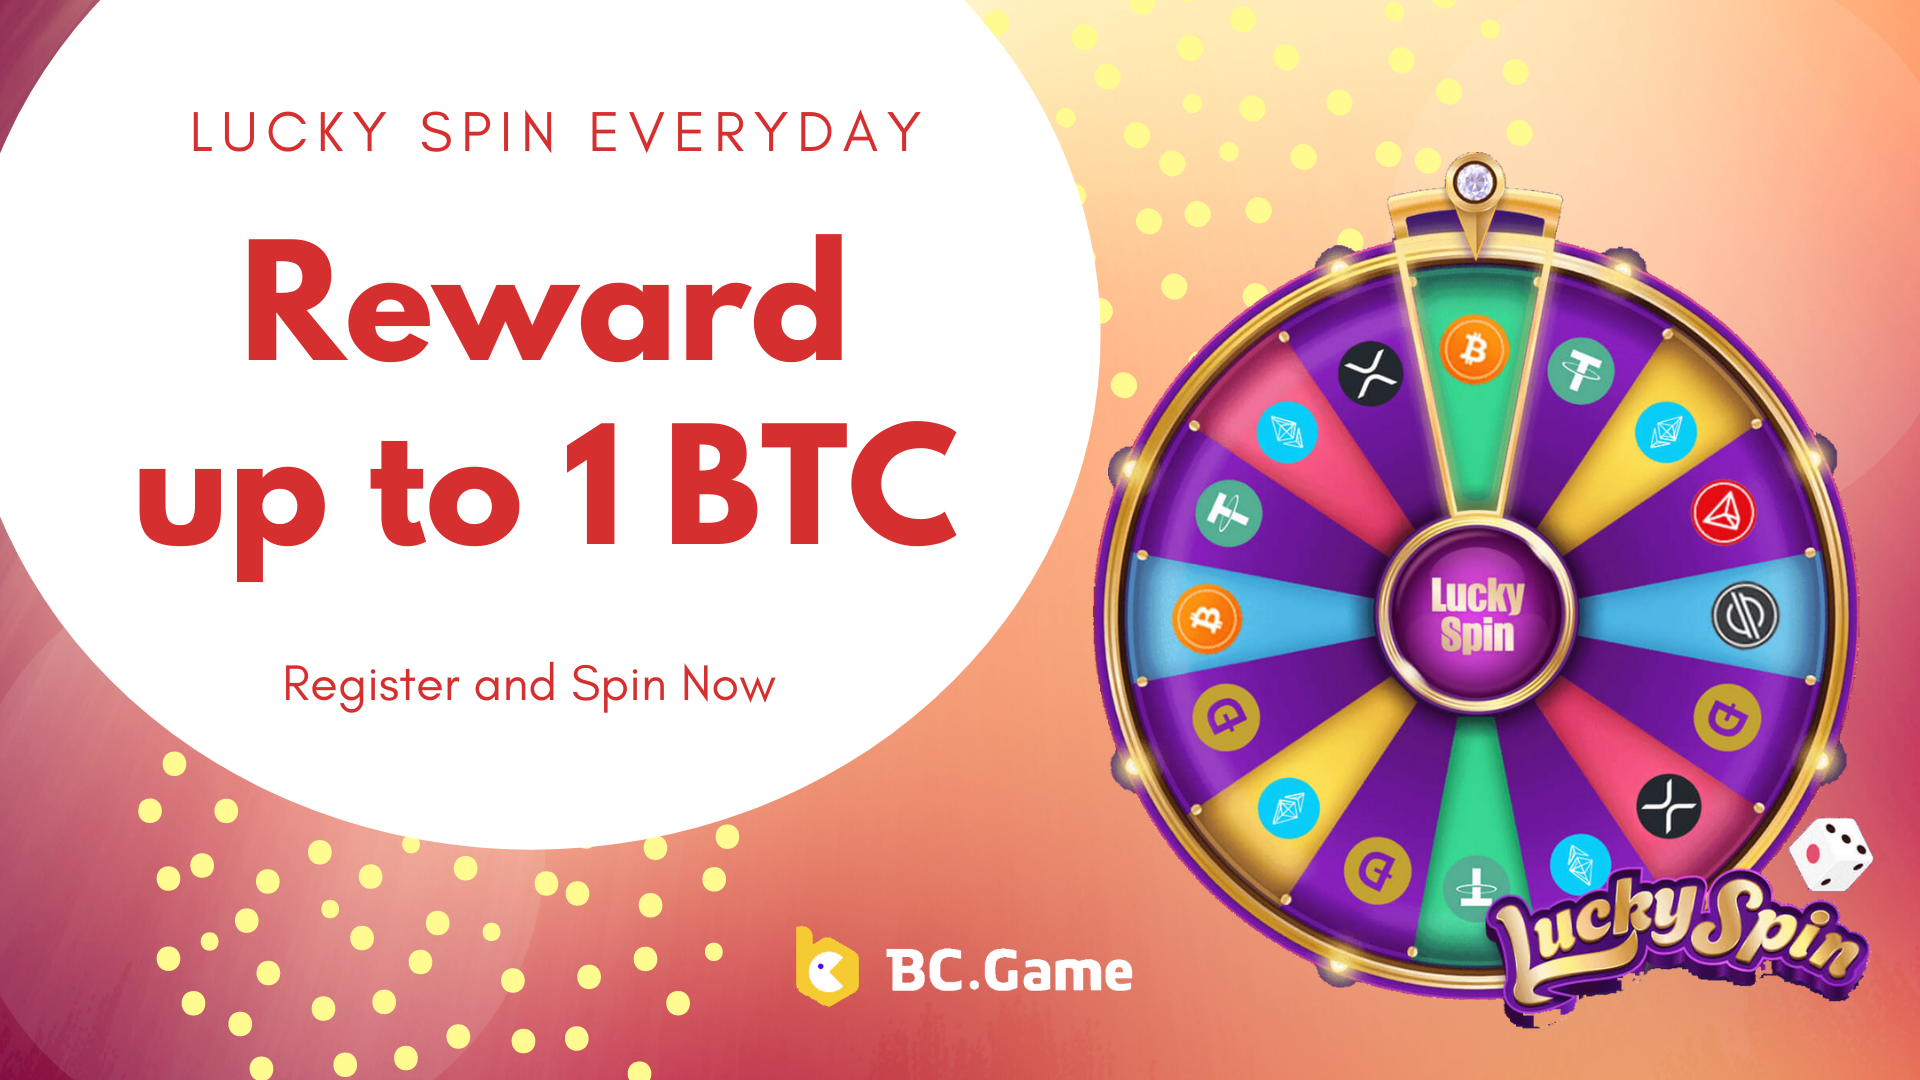 Spin now. BC game. BC game Casino. BC game Coco. BC game 5 BTC.